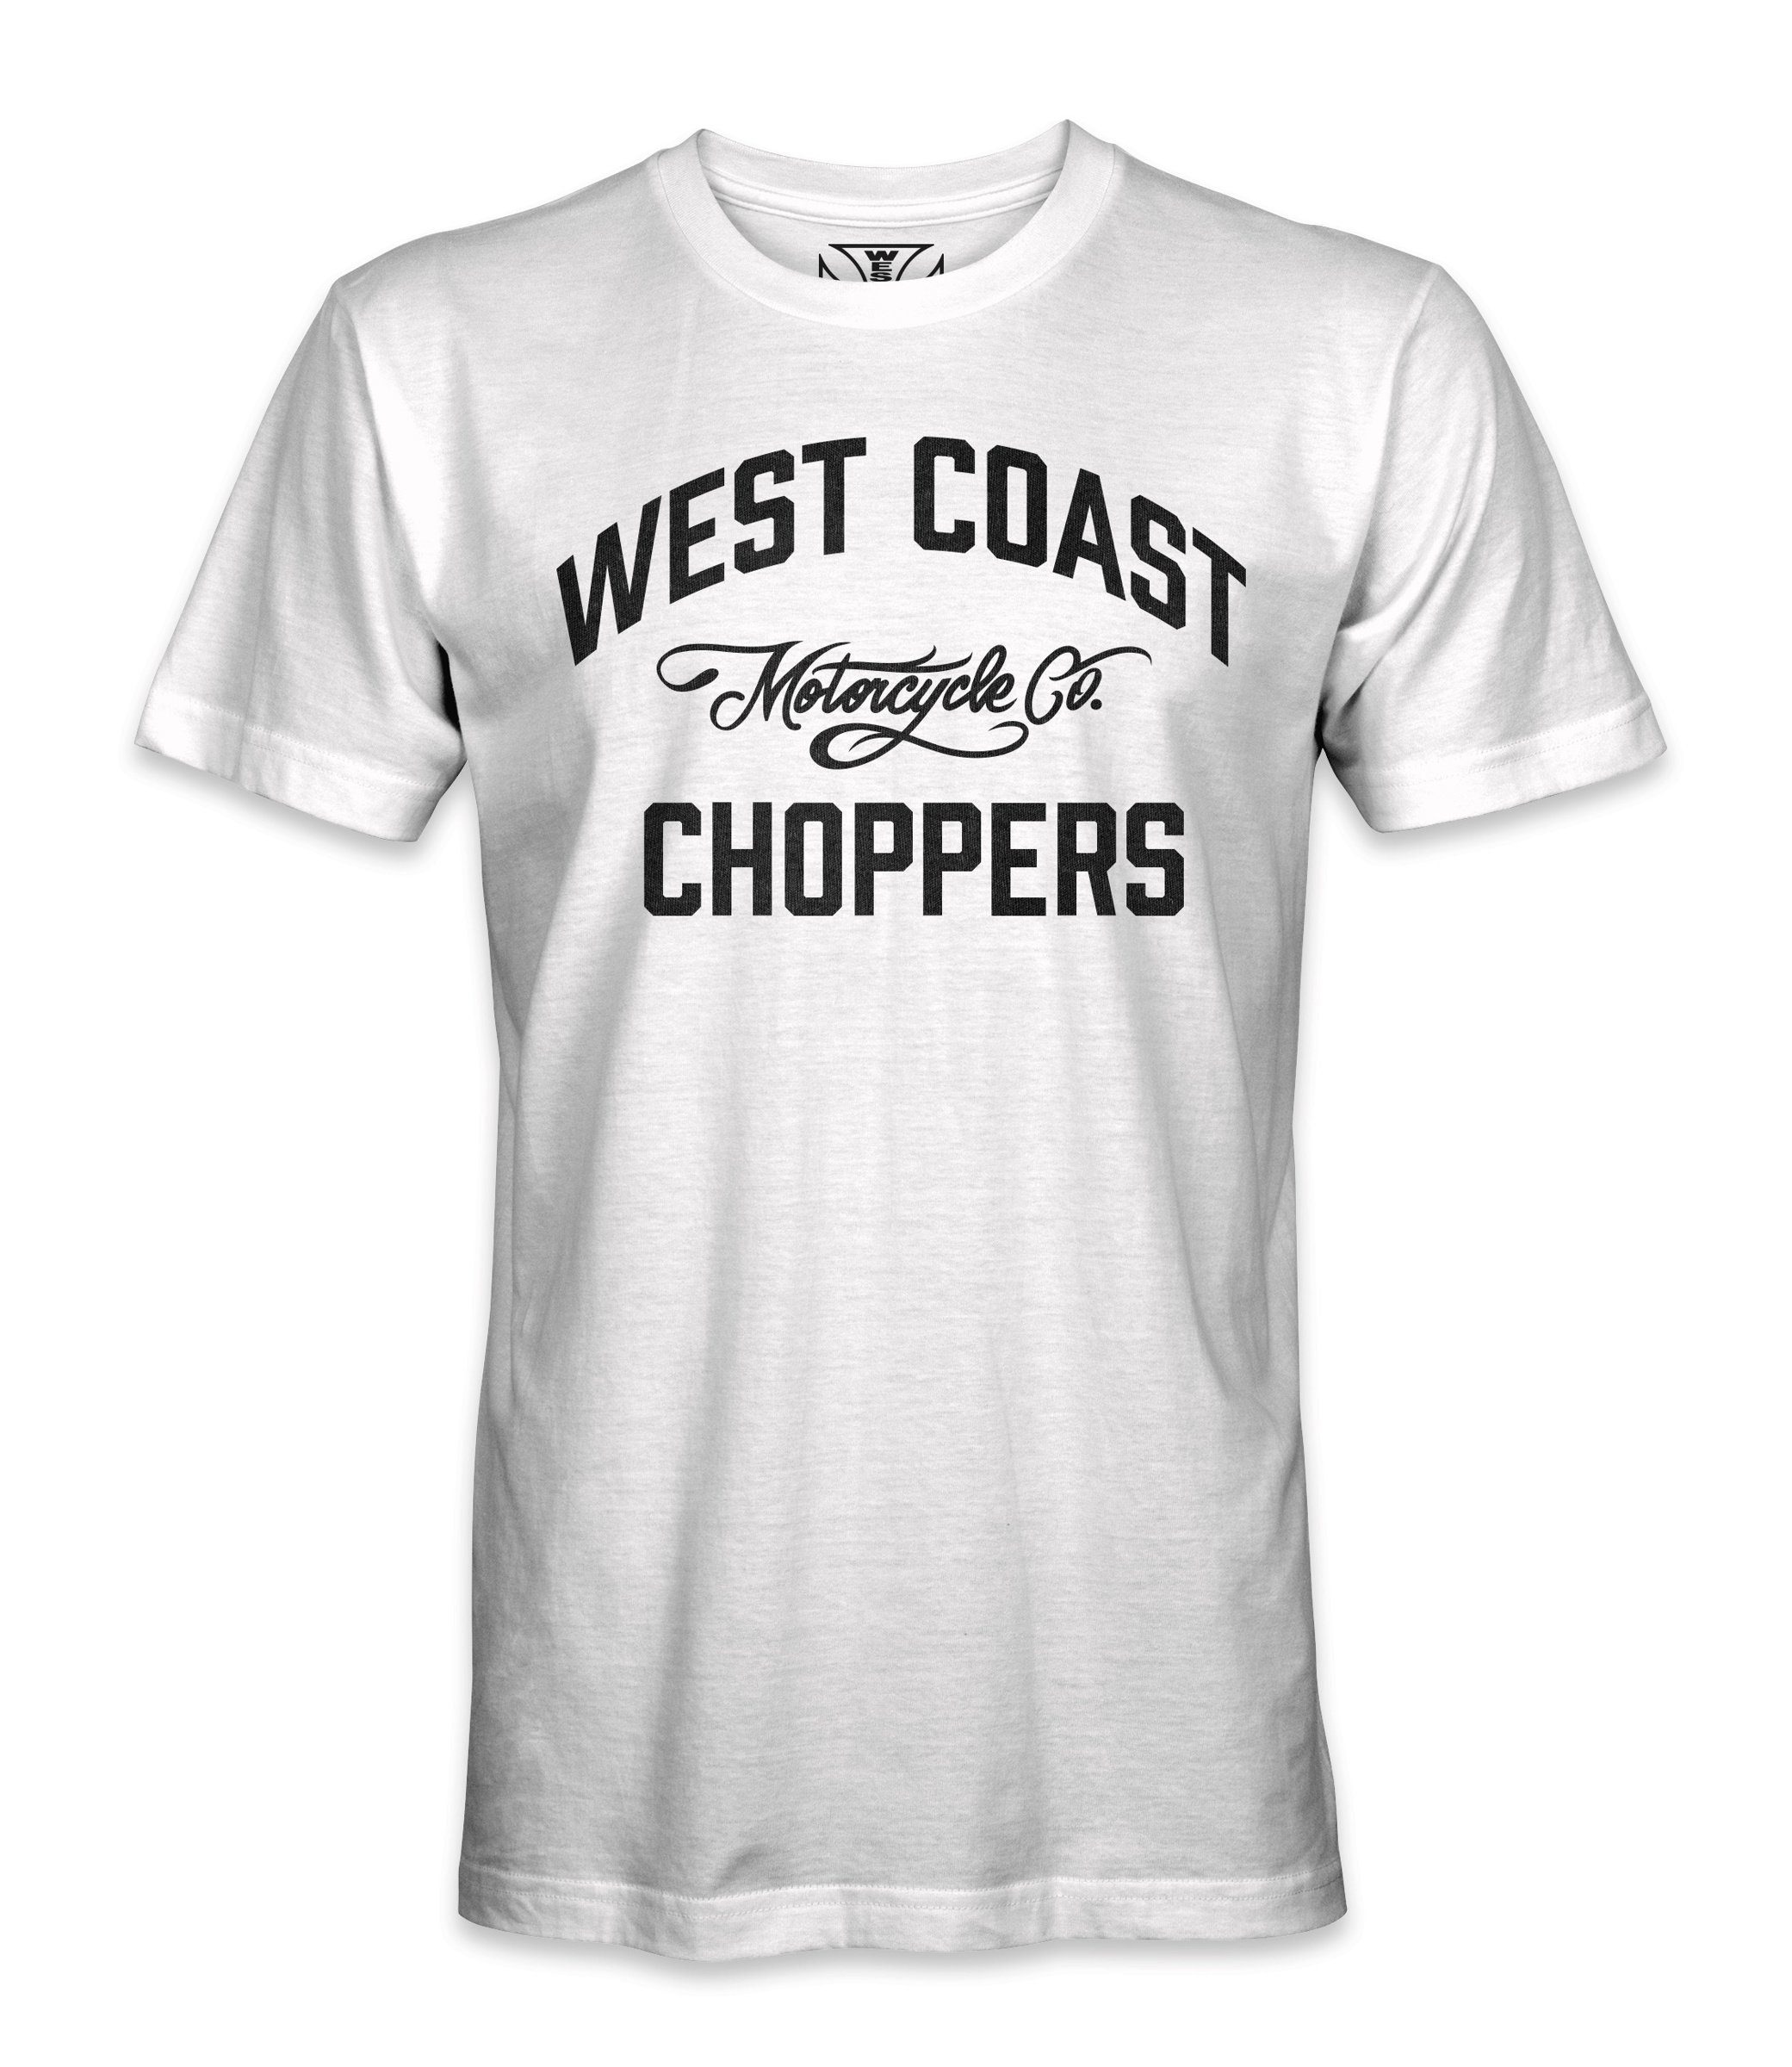 West Coast Choppers T-Shirt West Coast Choppers Herren T-Shirt Motorcycle Company Adult white